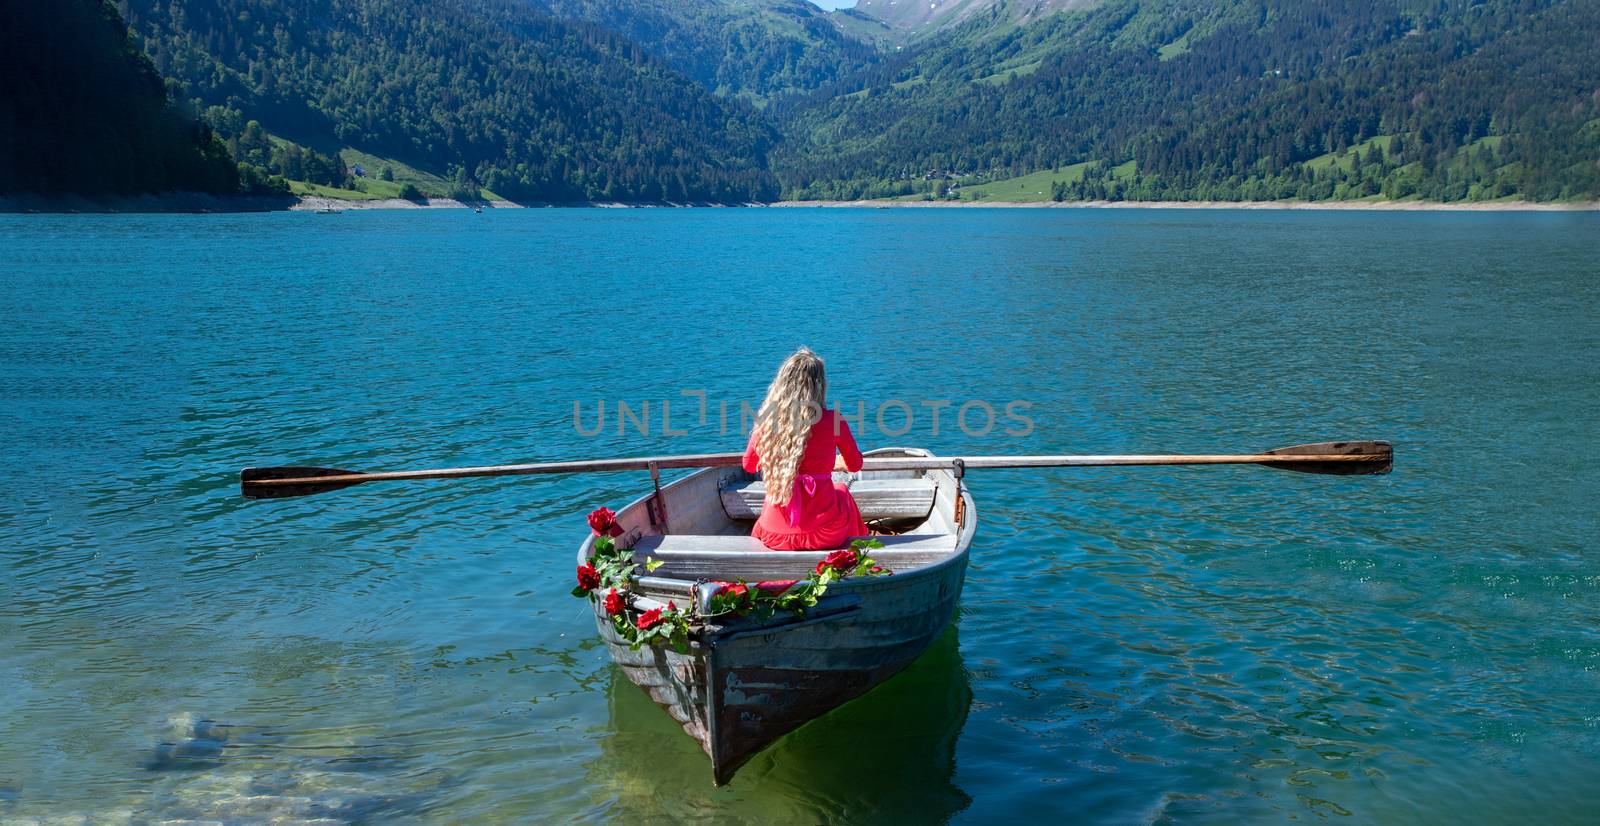 romantic scene with female model with long blond hair on a boat. by PeterHofstetter